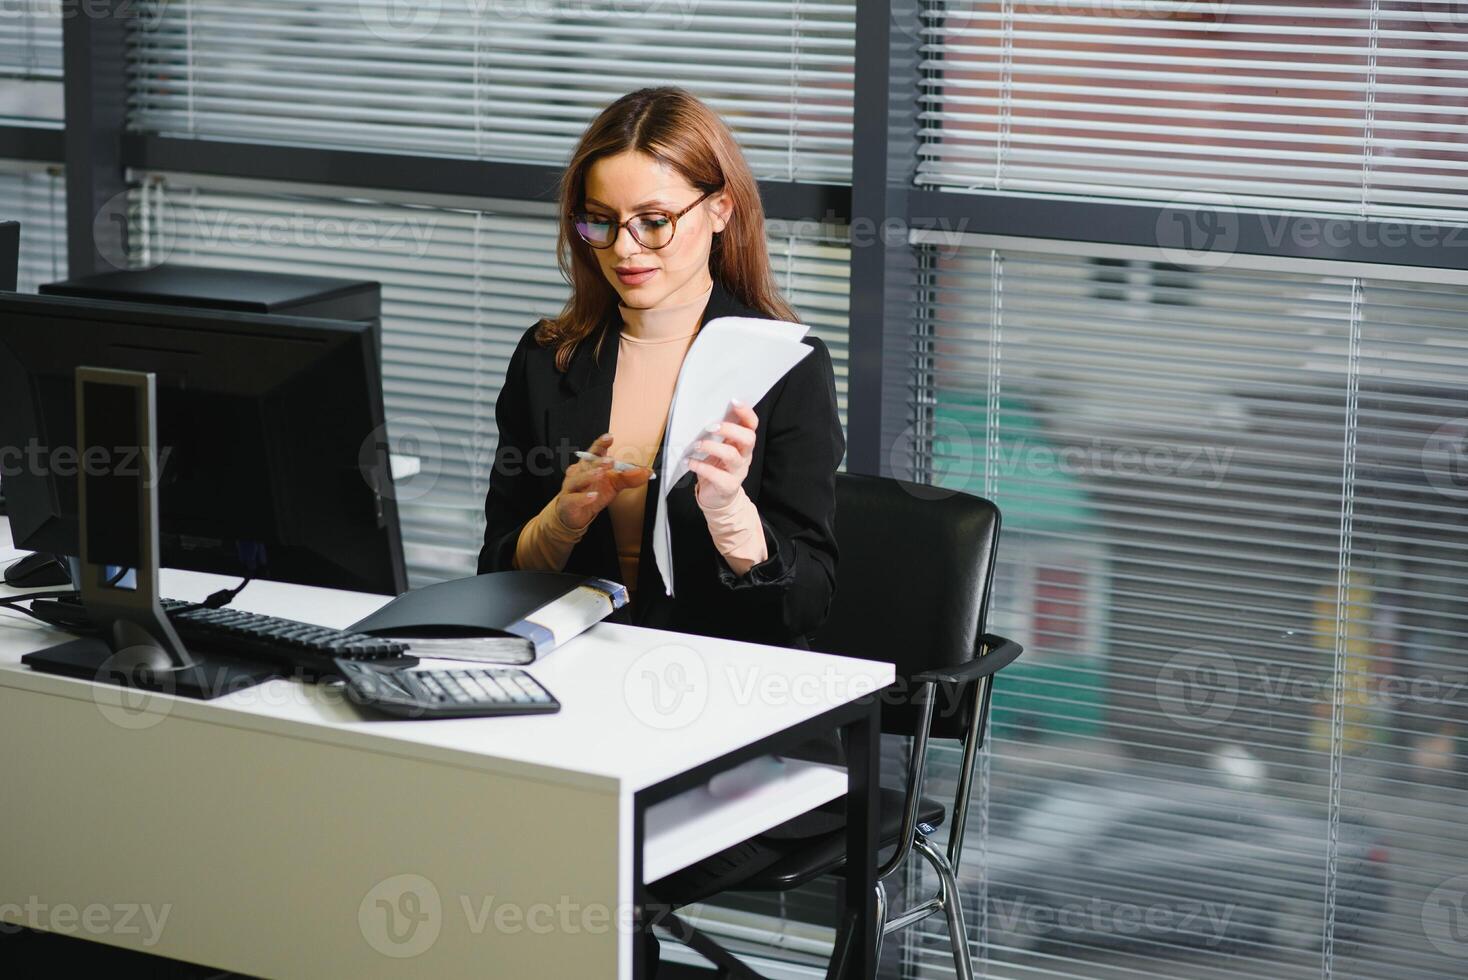 Pretty, nice, cute, perfect woman sitting at her desk on leather chair in work station, wearing glasses, formalwear, having laptop and notebook on the table photo